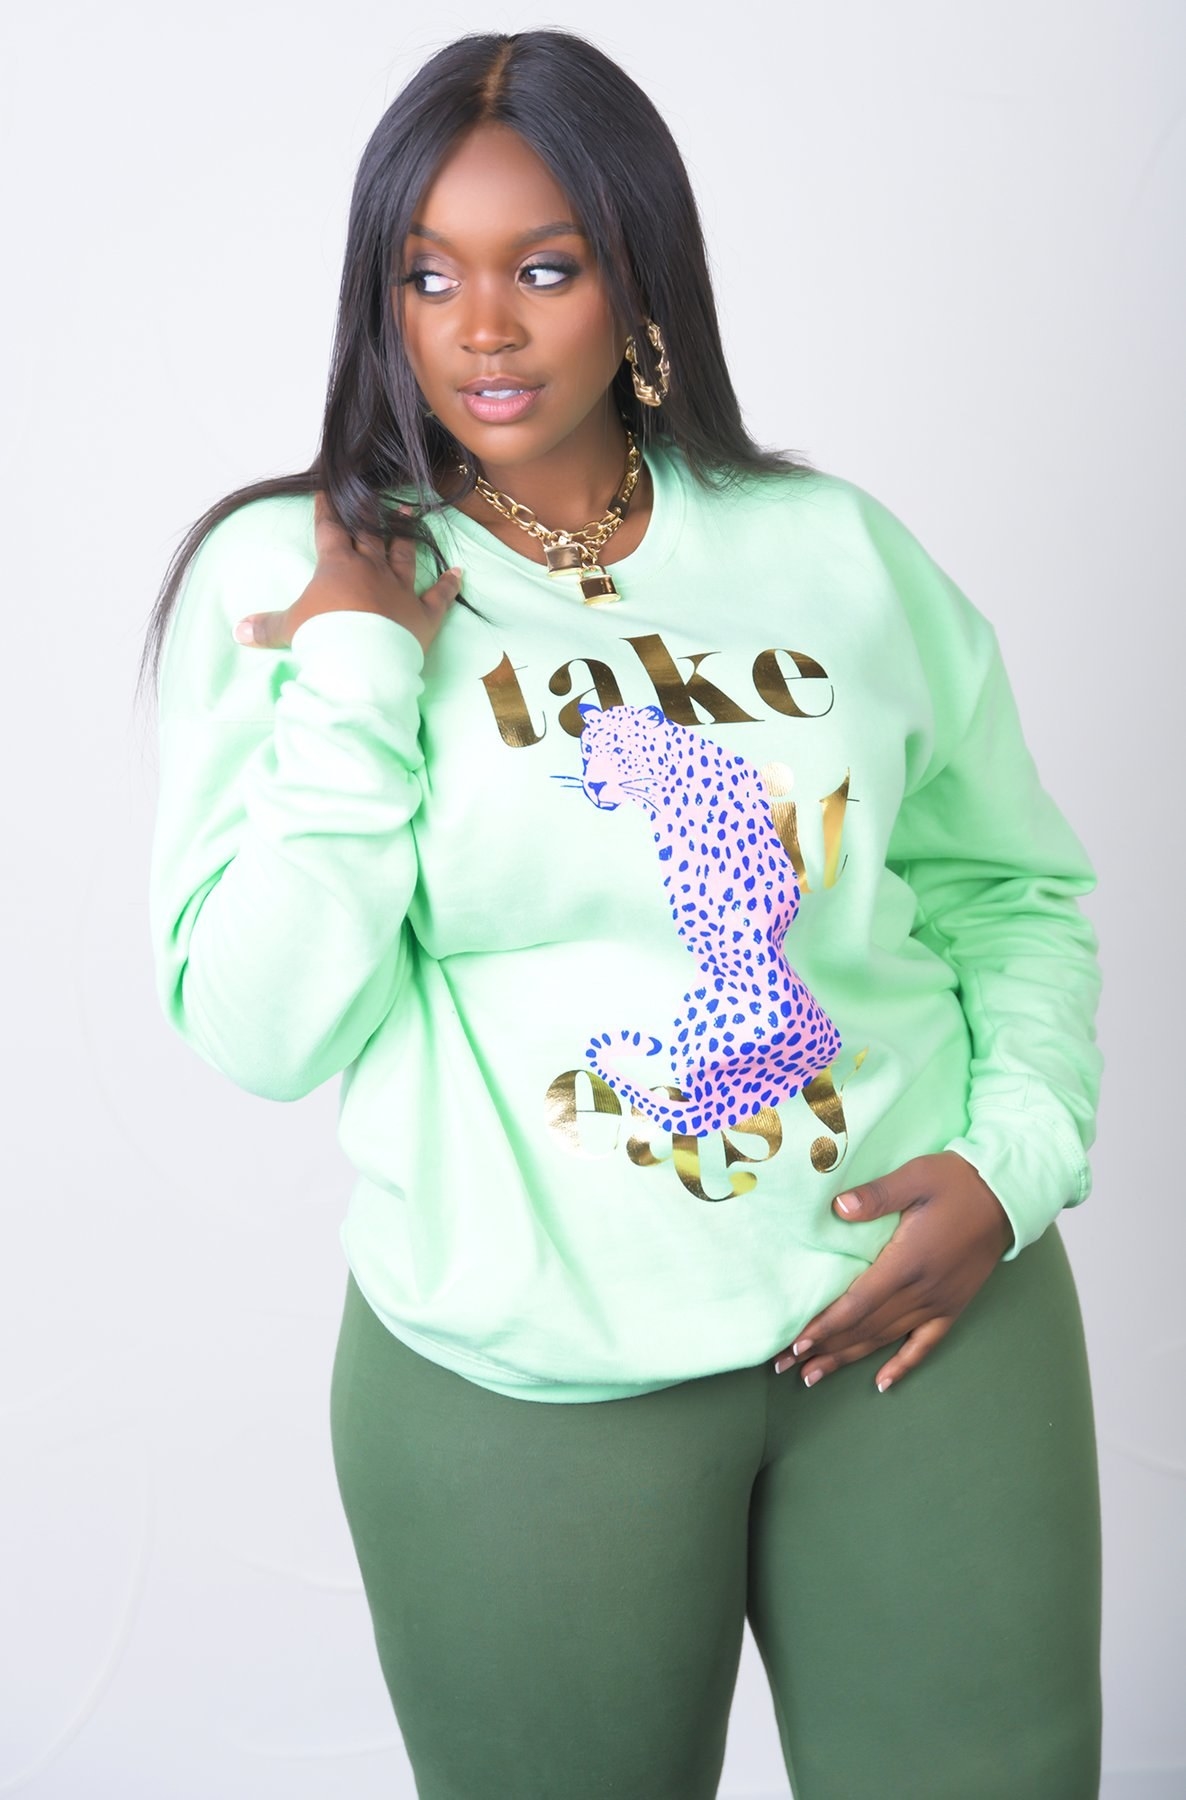 model wearing sweatshirt with a cheetah cartoon on it and a &quot;take it easy&quot; message